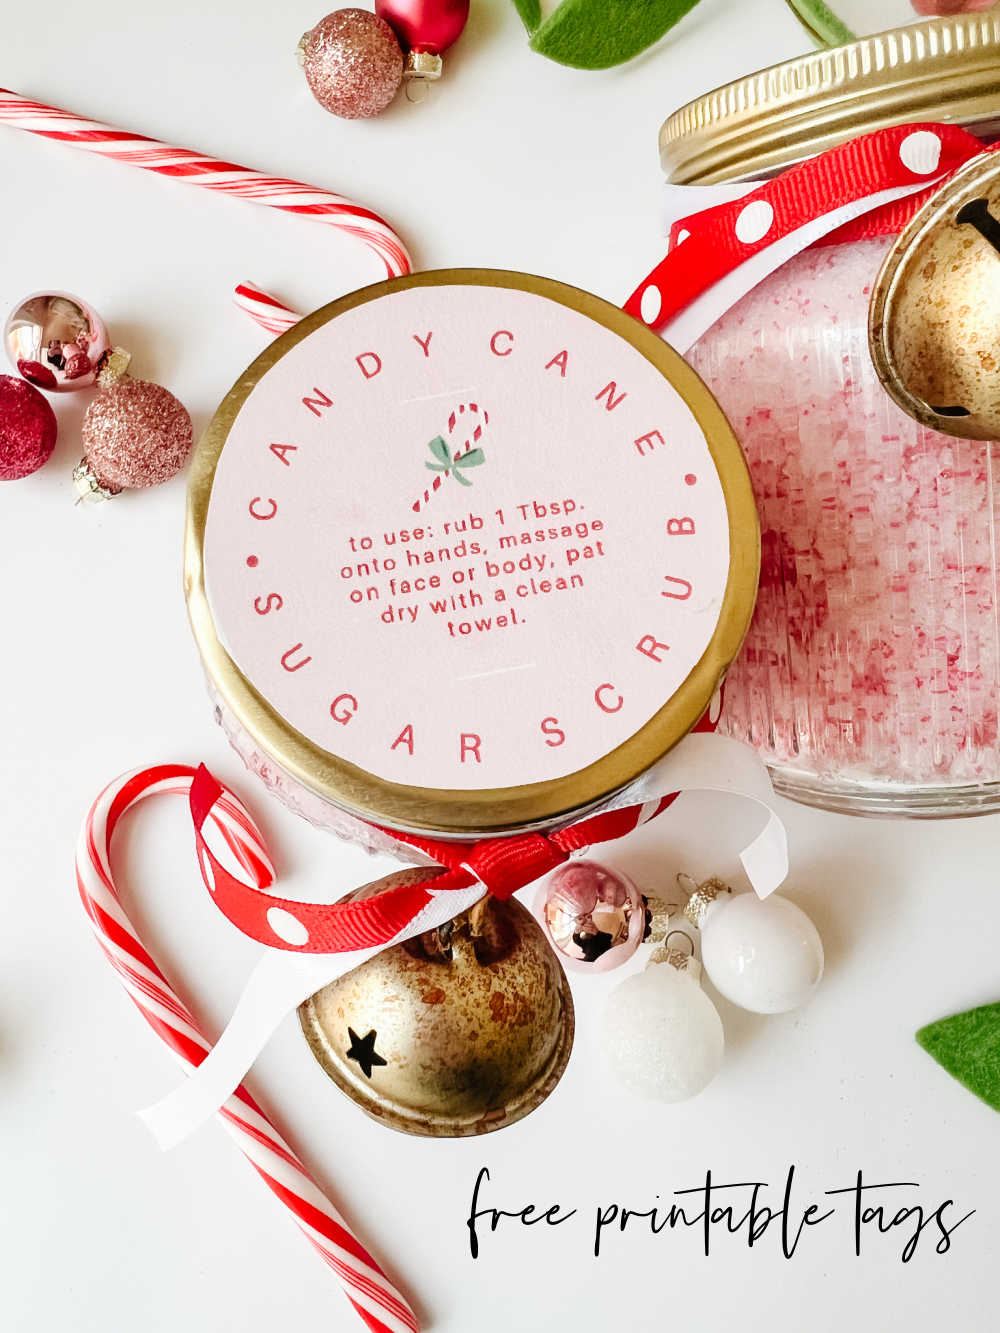 -Ingredient Candy Cane Sugar Scrub. This candy cane sugar scrub exfoliates and invigorates the skin and is the perfect gift idea for anyone on your list! 